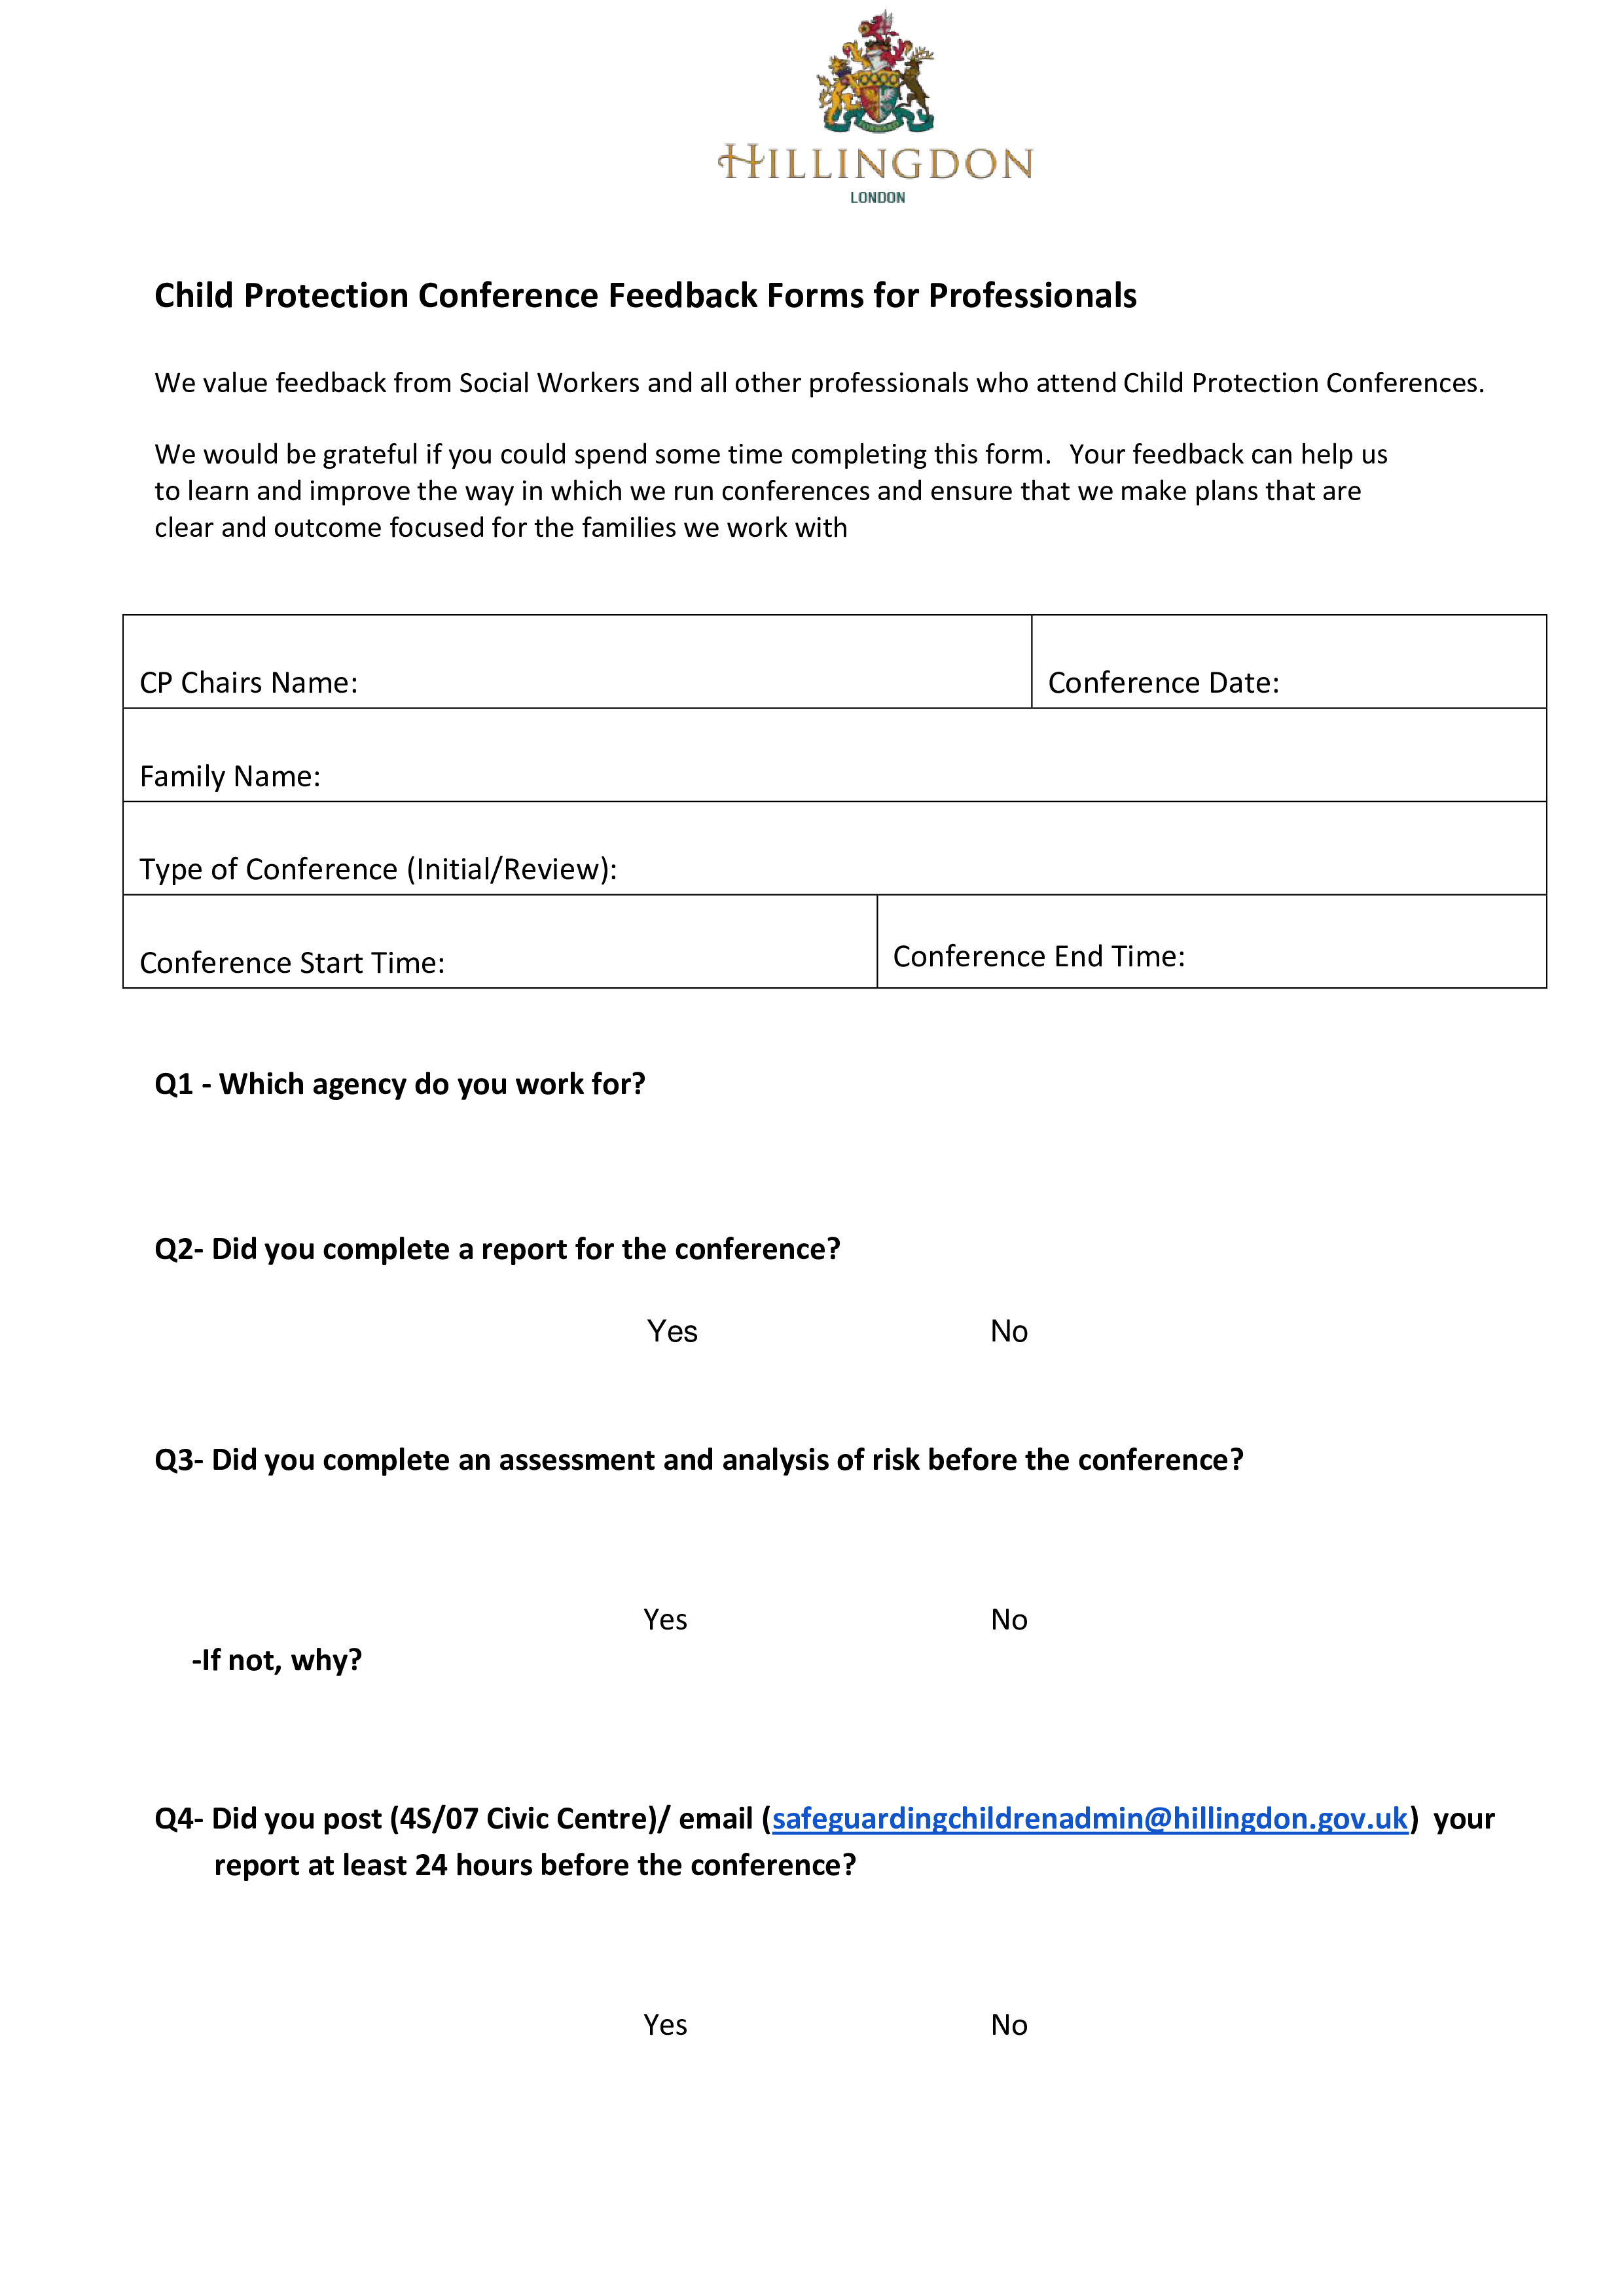 Child Conference Forms For Professionals main image